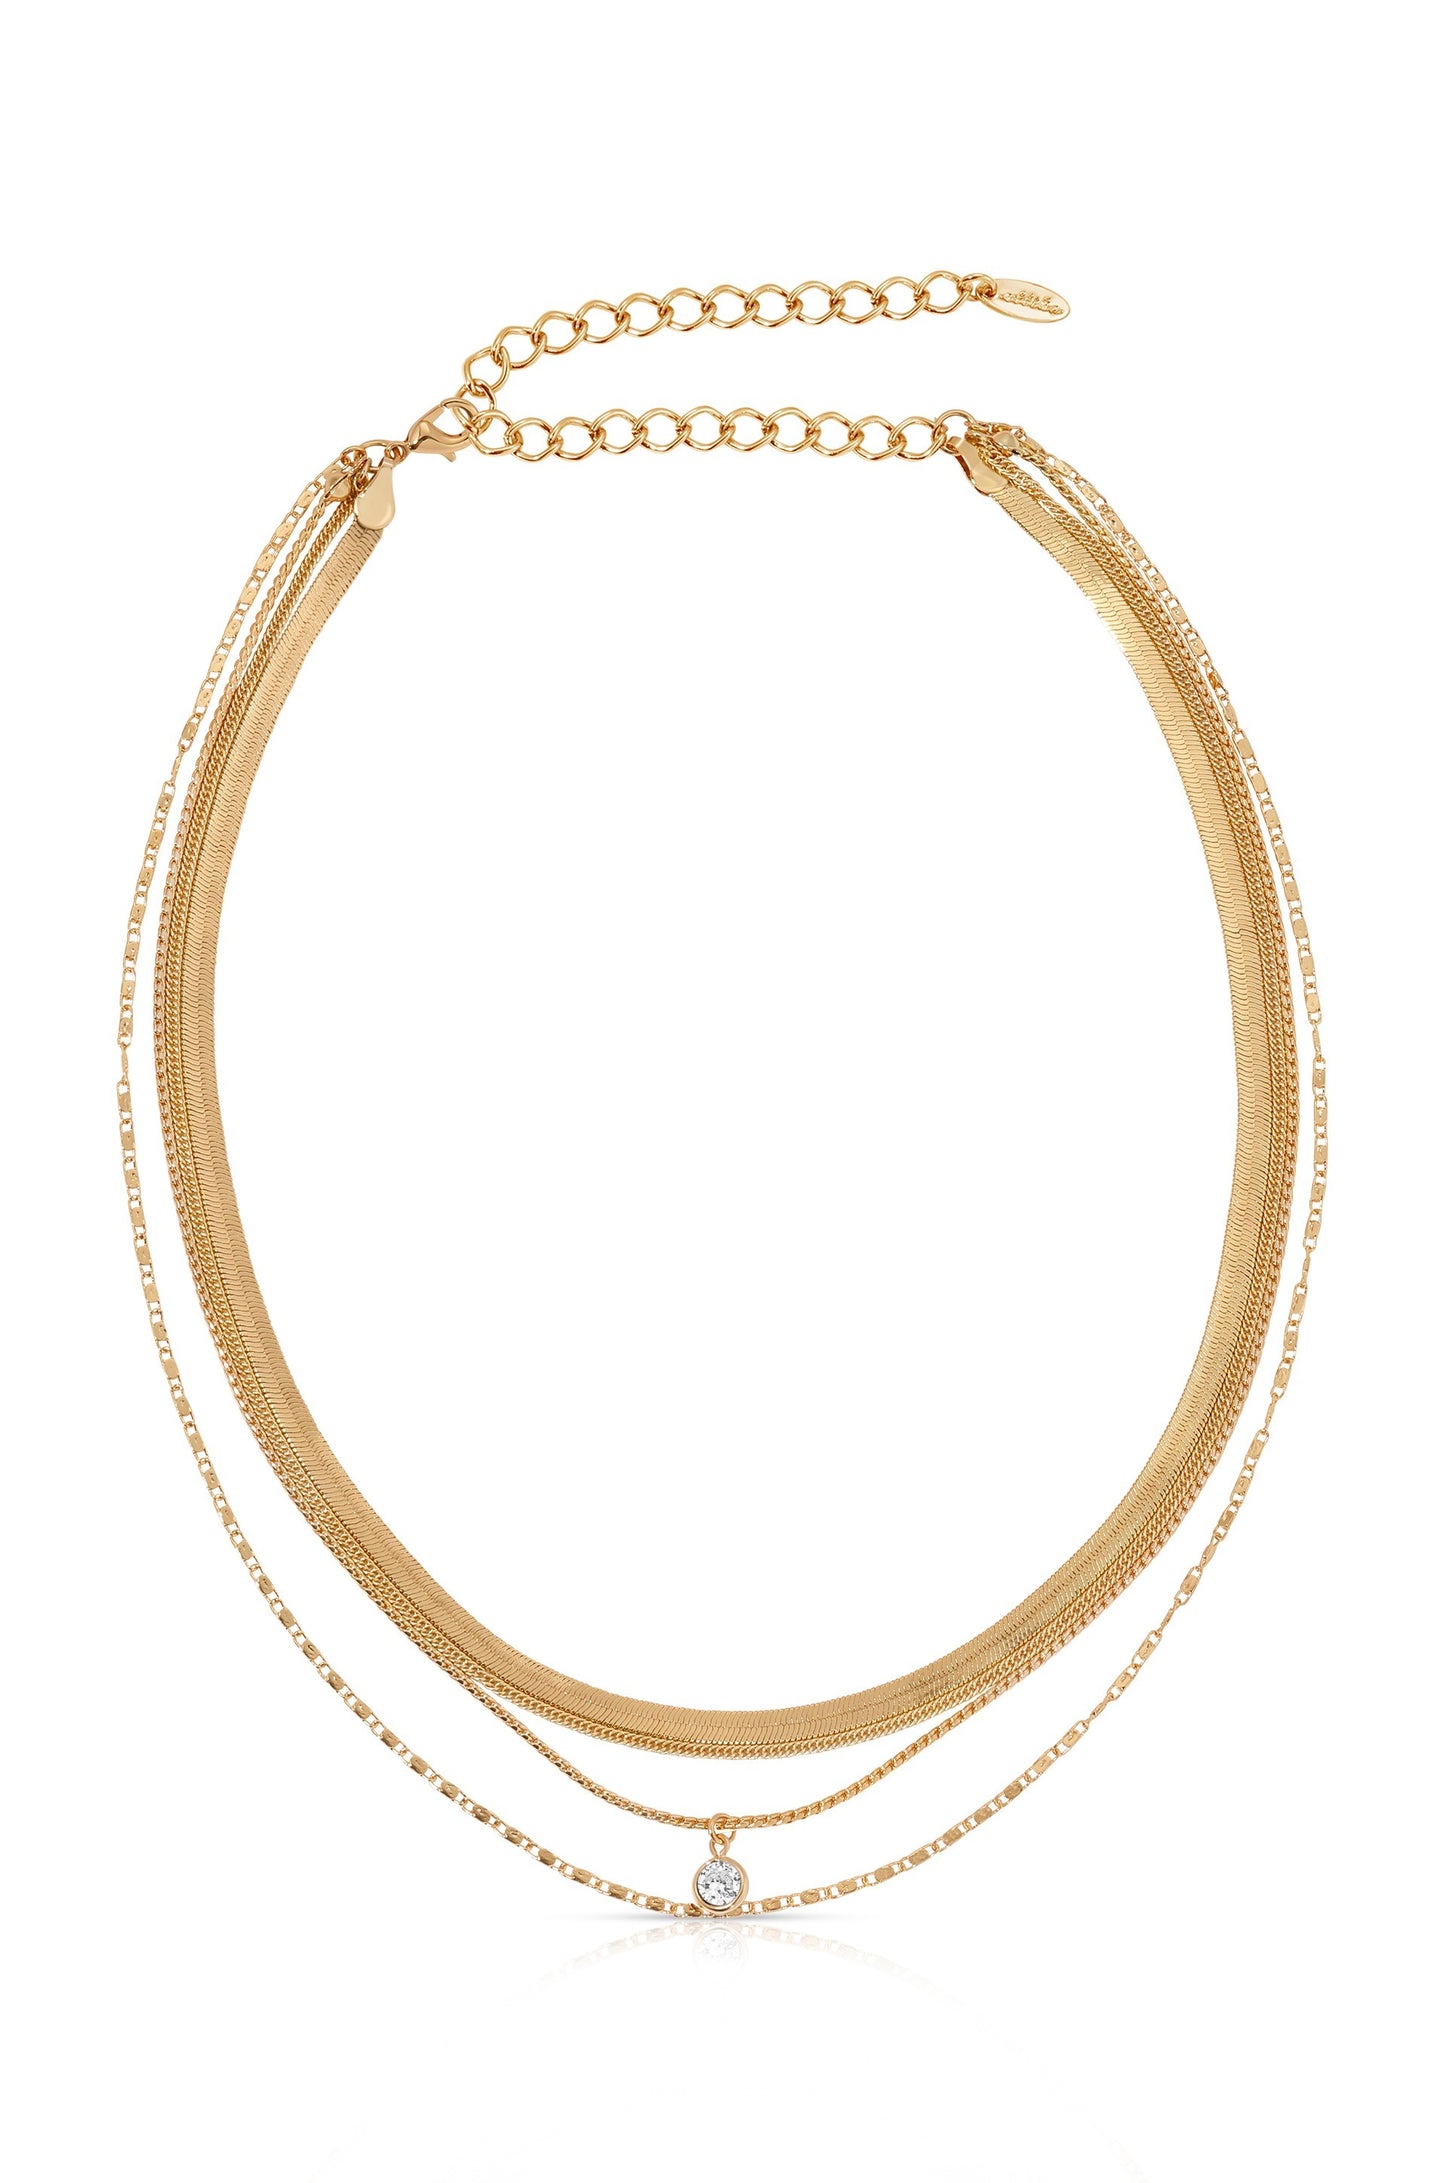 All the Chains 18k Gold Plated Layered Necklace full